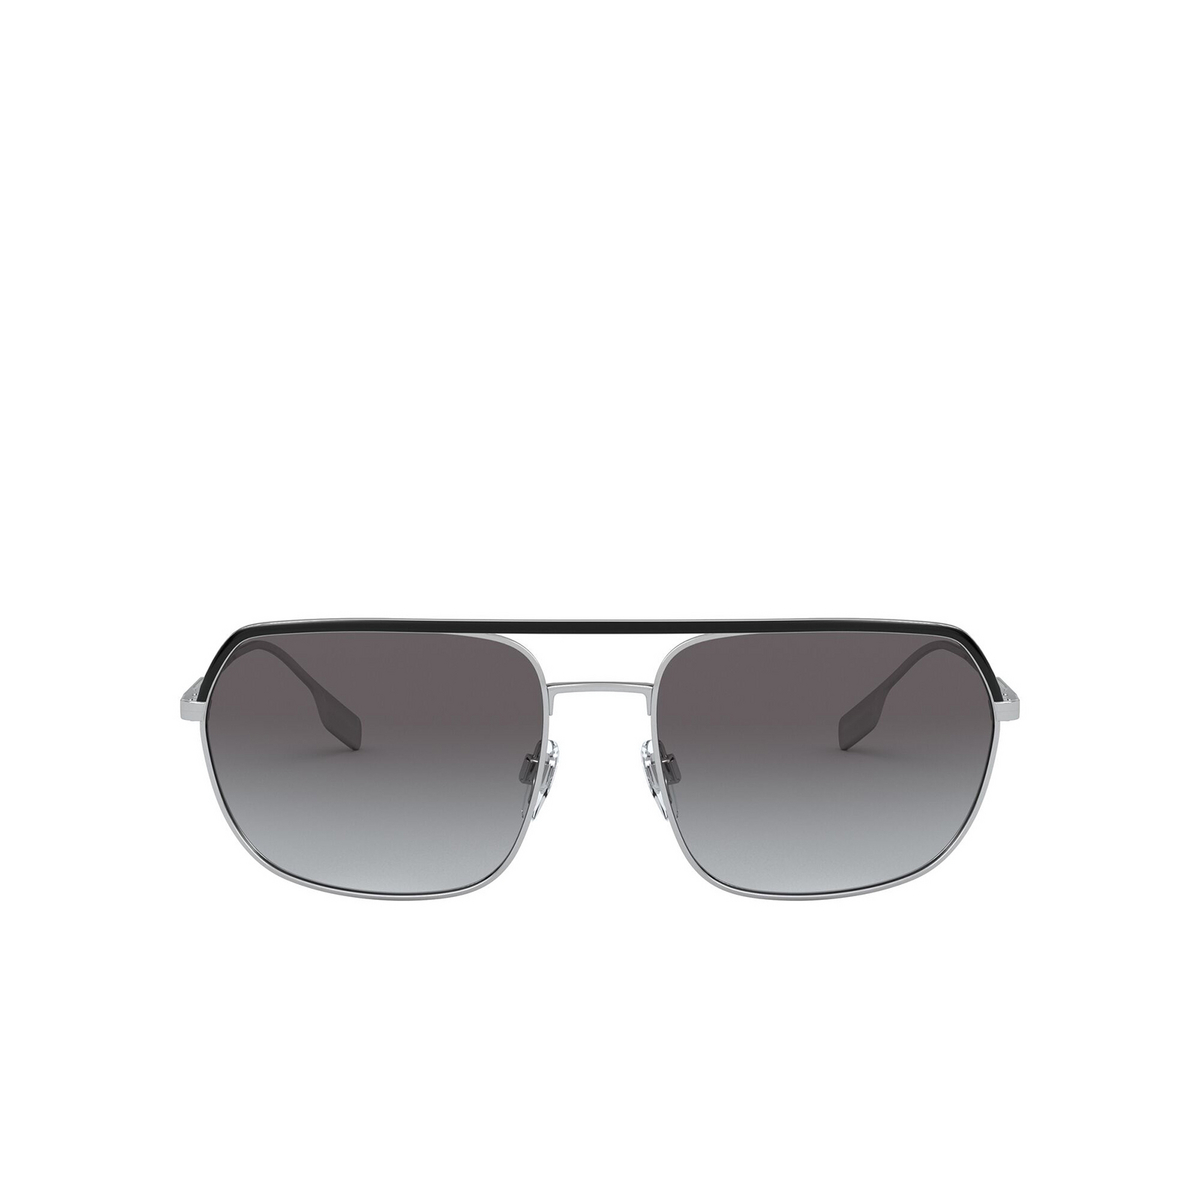 Burberry® Square Sunglasses: BE3117 color Silver / Black 10058G - front view.